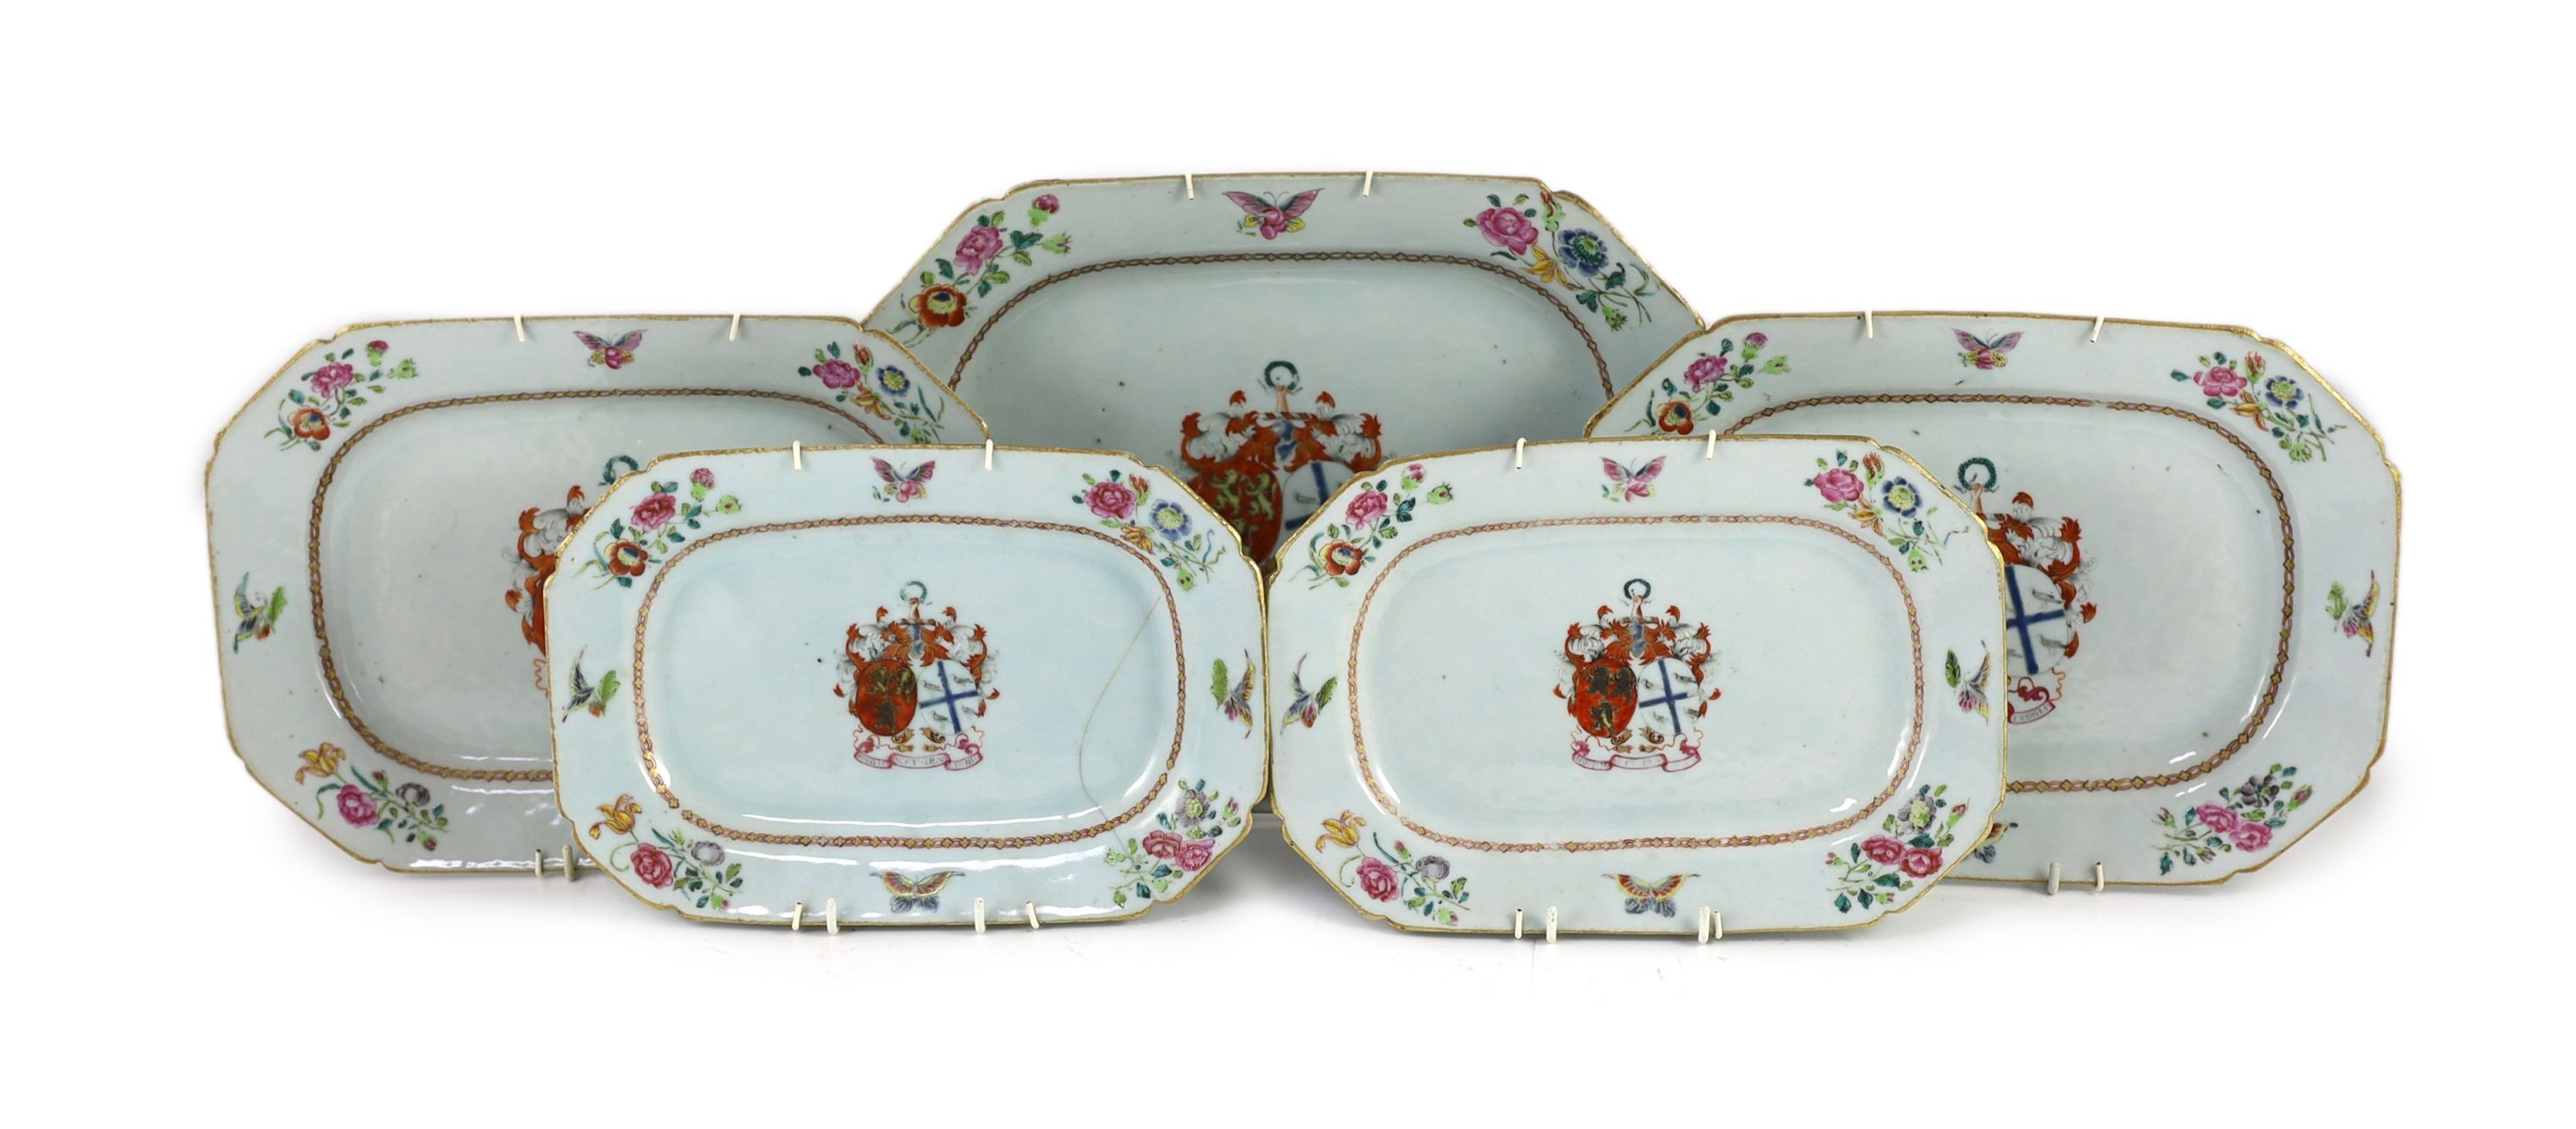 A set of five Chinese Armorial meat plates, circa 1755, with painted central Ross Family Coat of Arms, with motto - 'Nobilis Est Ira Leonis' 26 cm – 33 cm, some cracks